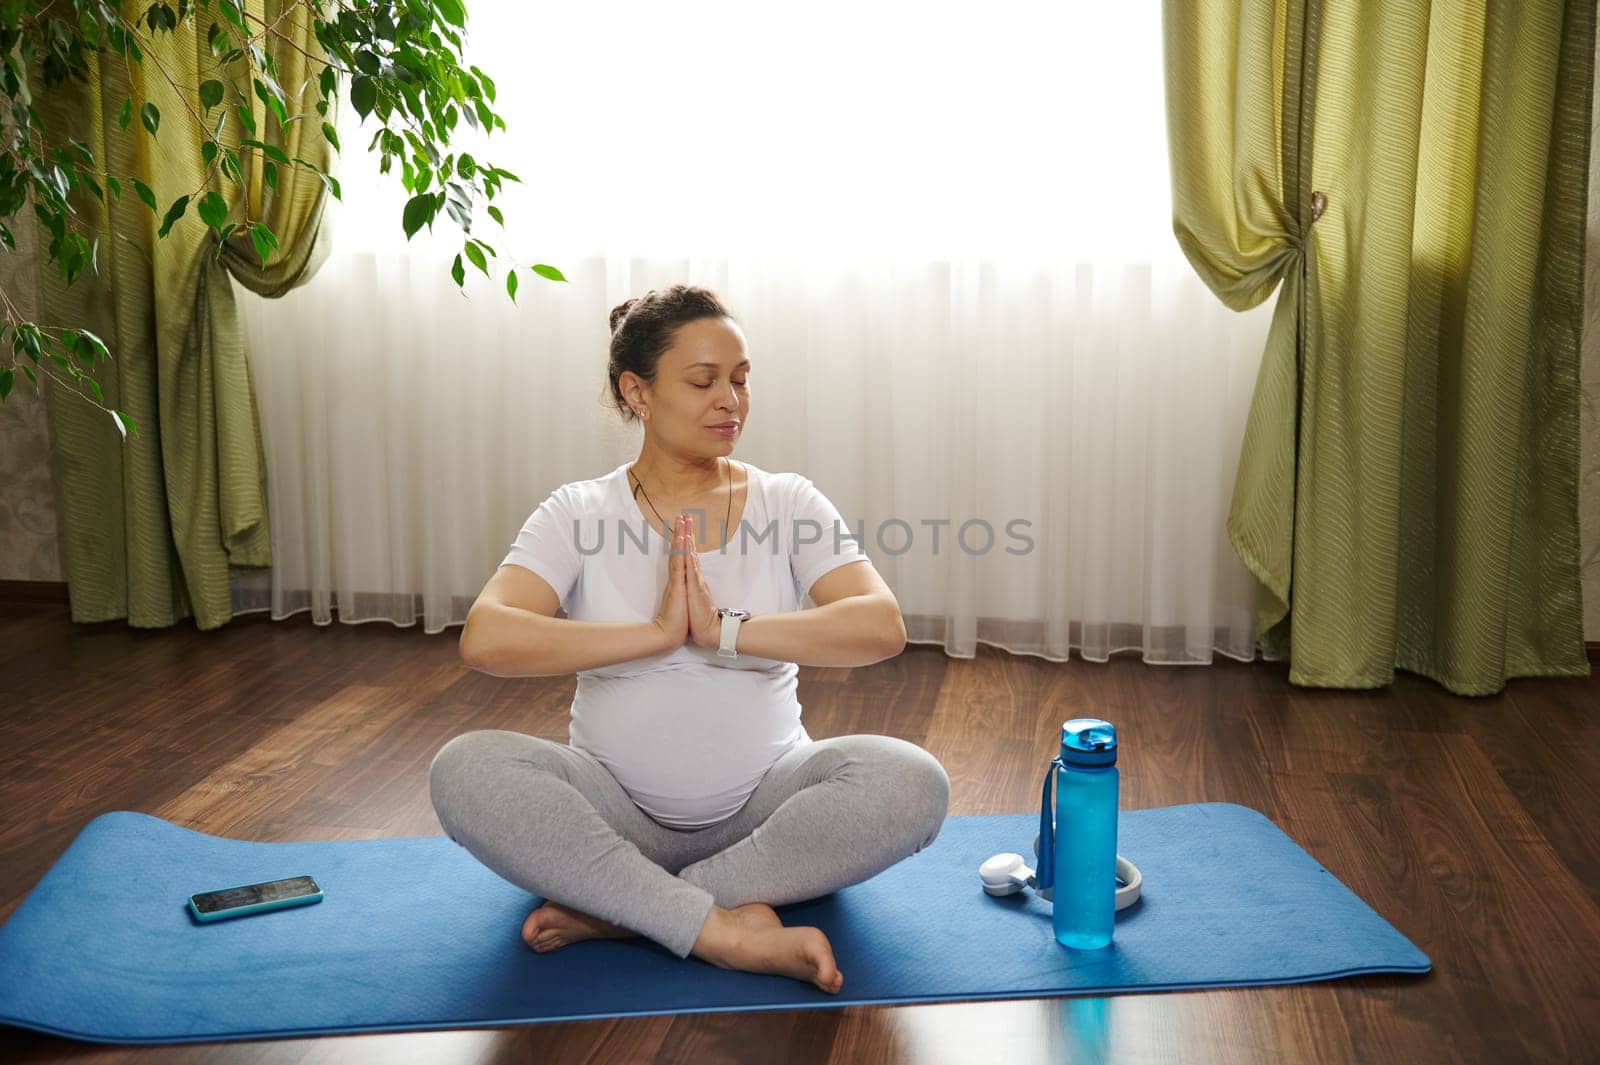 Delightful ethnic pregnant woman with closed eyes, meditating on lotus pose on yoga mat, with hands palms together. Happy gravid female enjoying healthy lifestyle and positive emotions in pregnancy